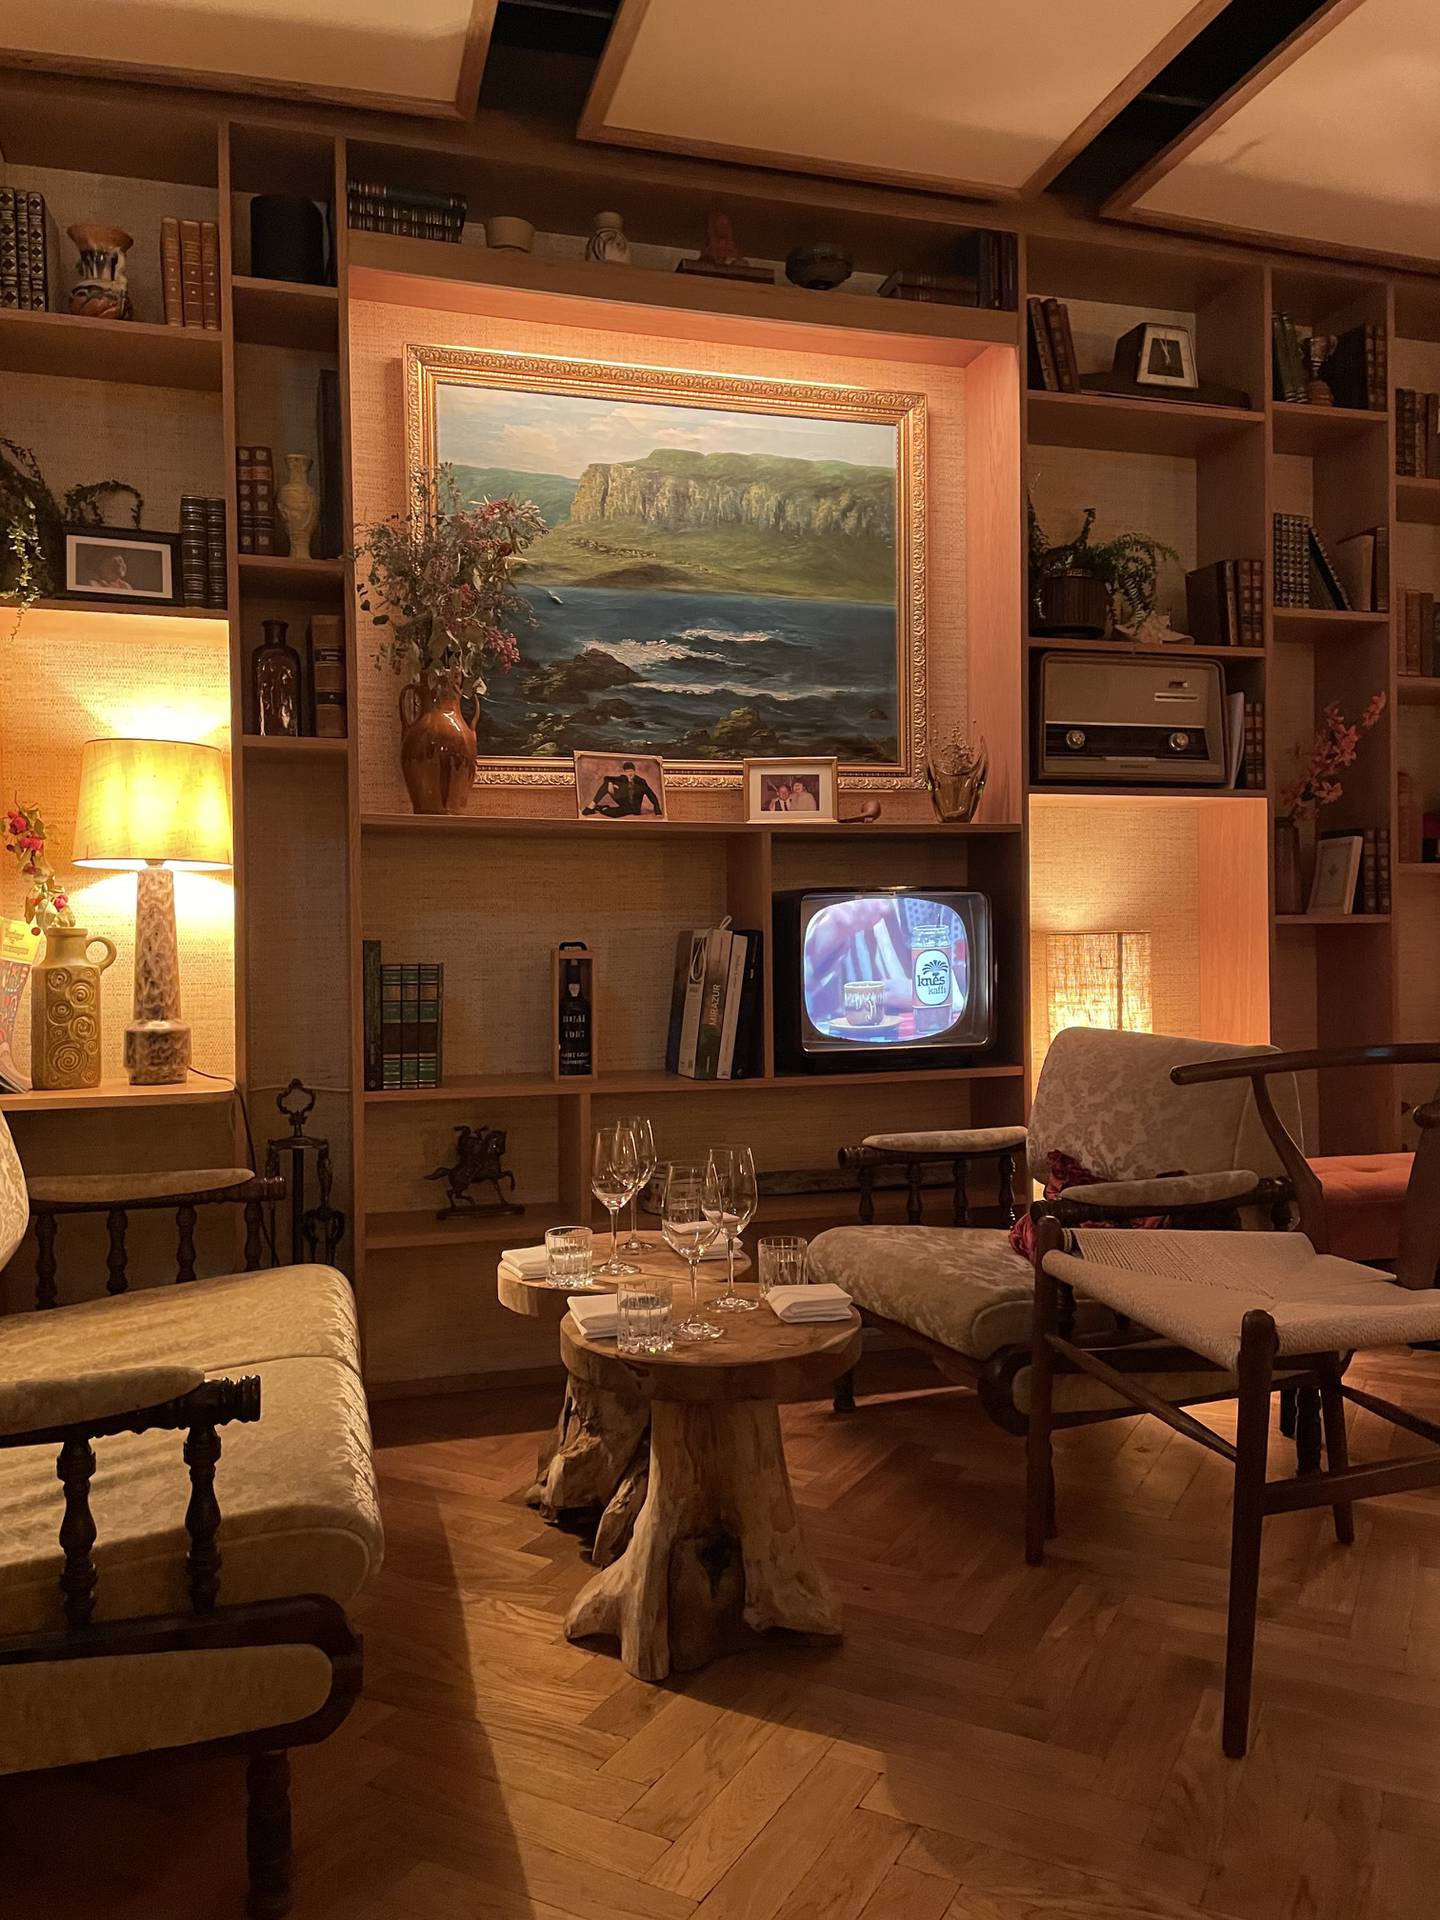 Prior to starting dinner, guests at Óx, a Michelin-starred restaurant in Reykjavik, are invited to sit inside a 1950s-style living room.